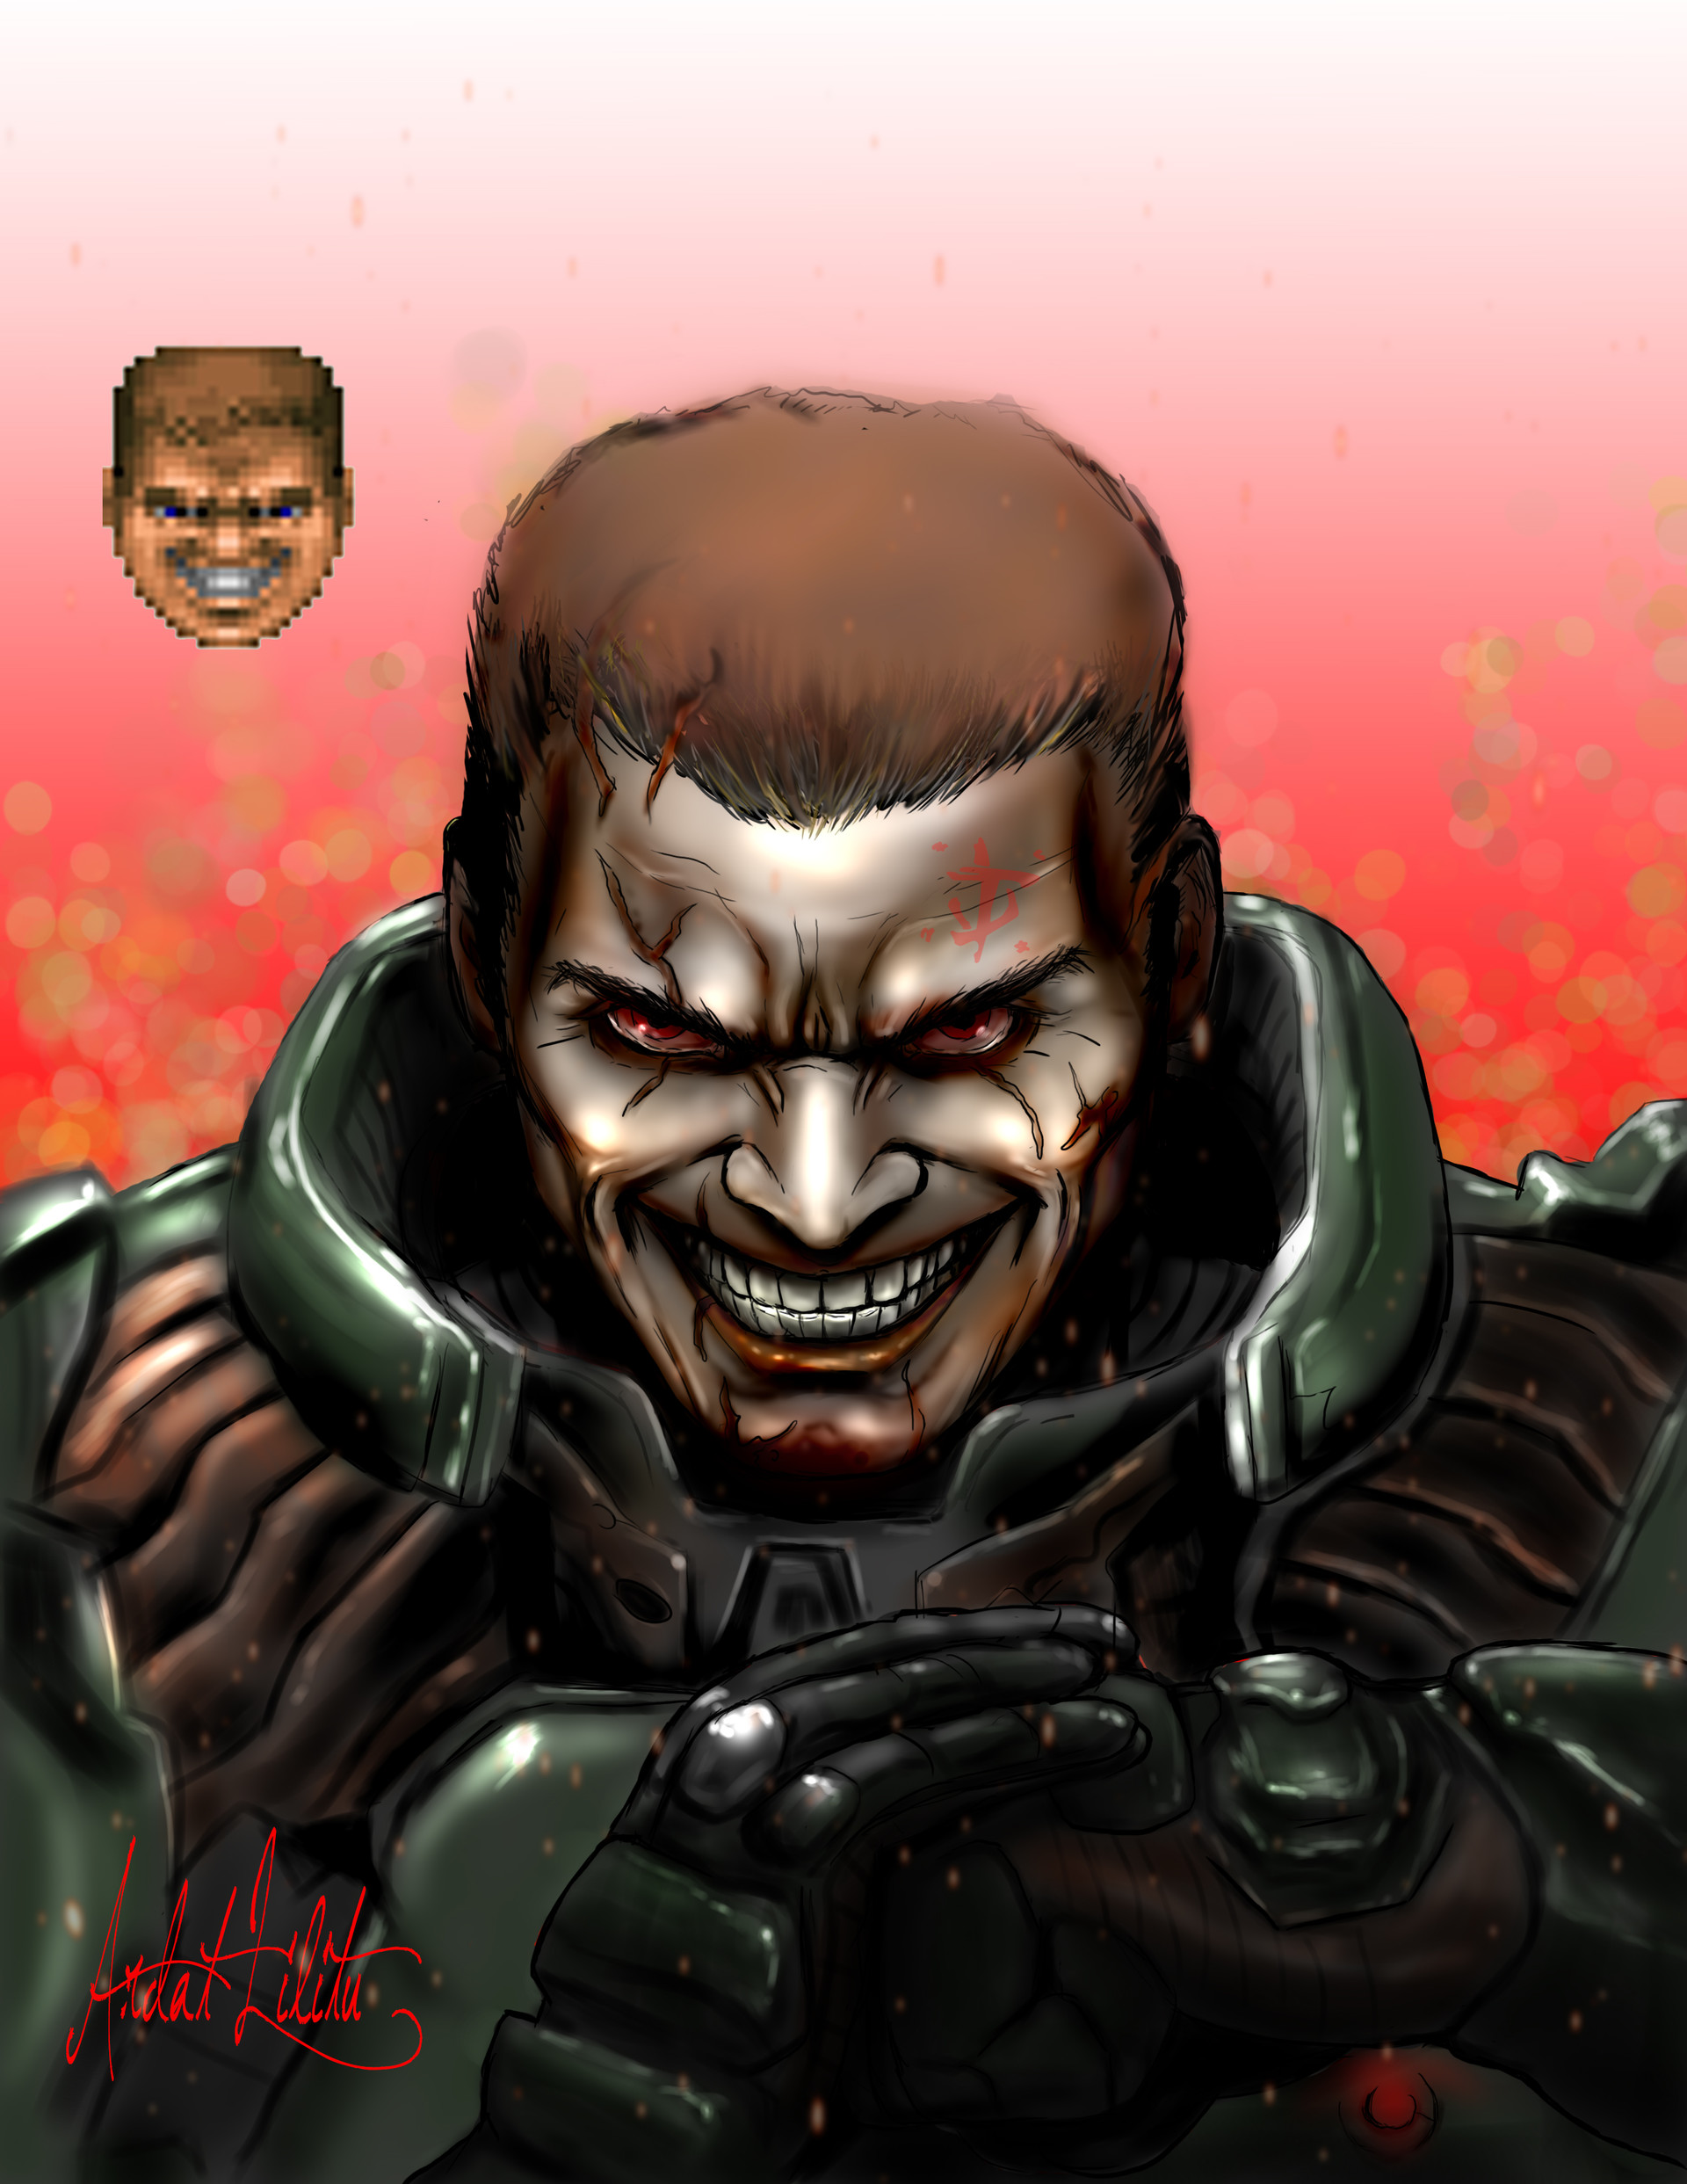 I'd like this without the doom guy icon watermark thing, and also with...